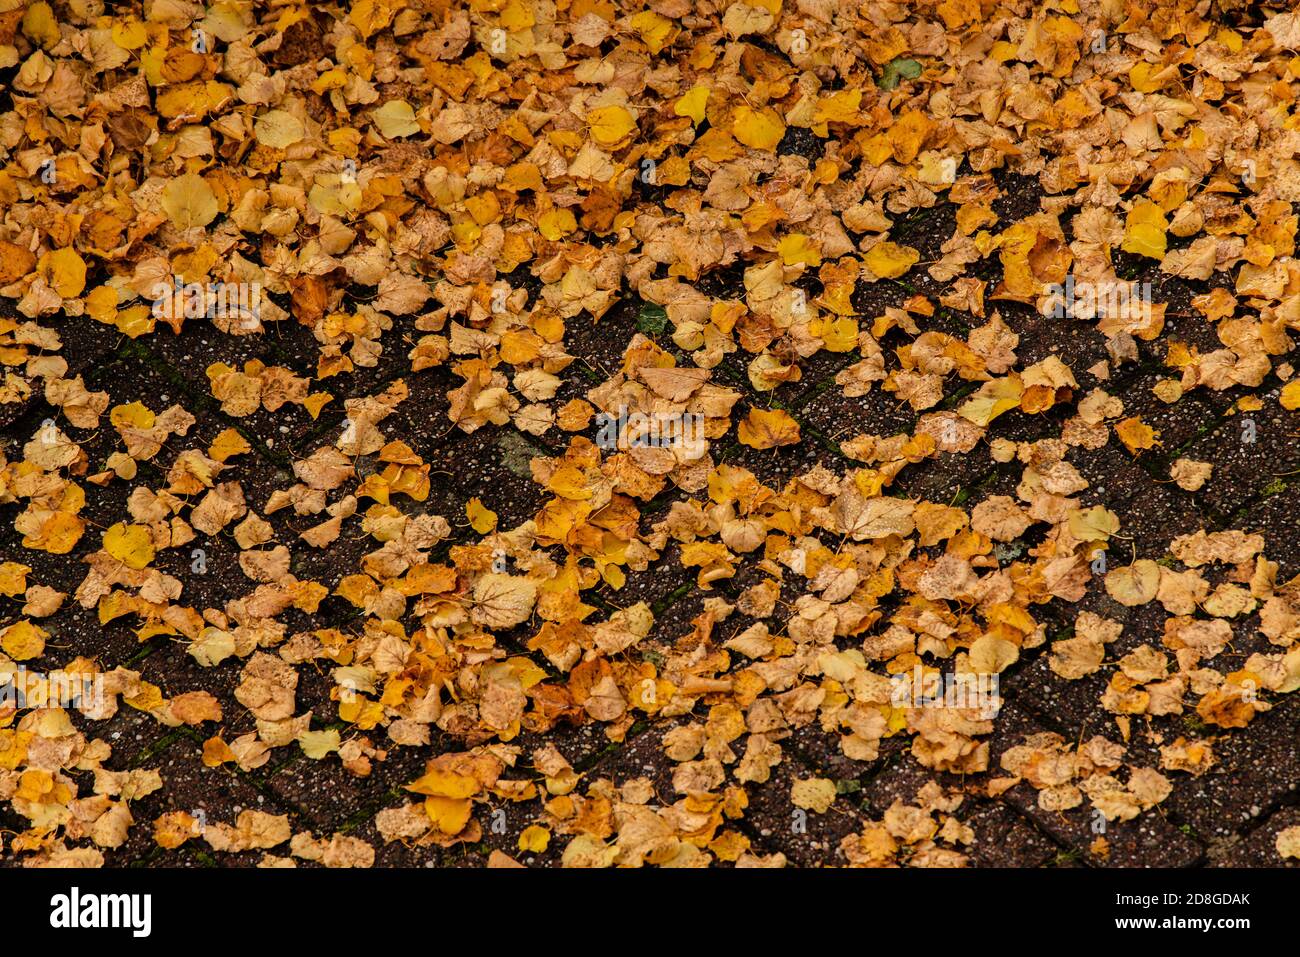 View from above of orange and yellow leaves on the ground Stock Photo